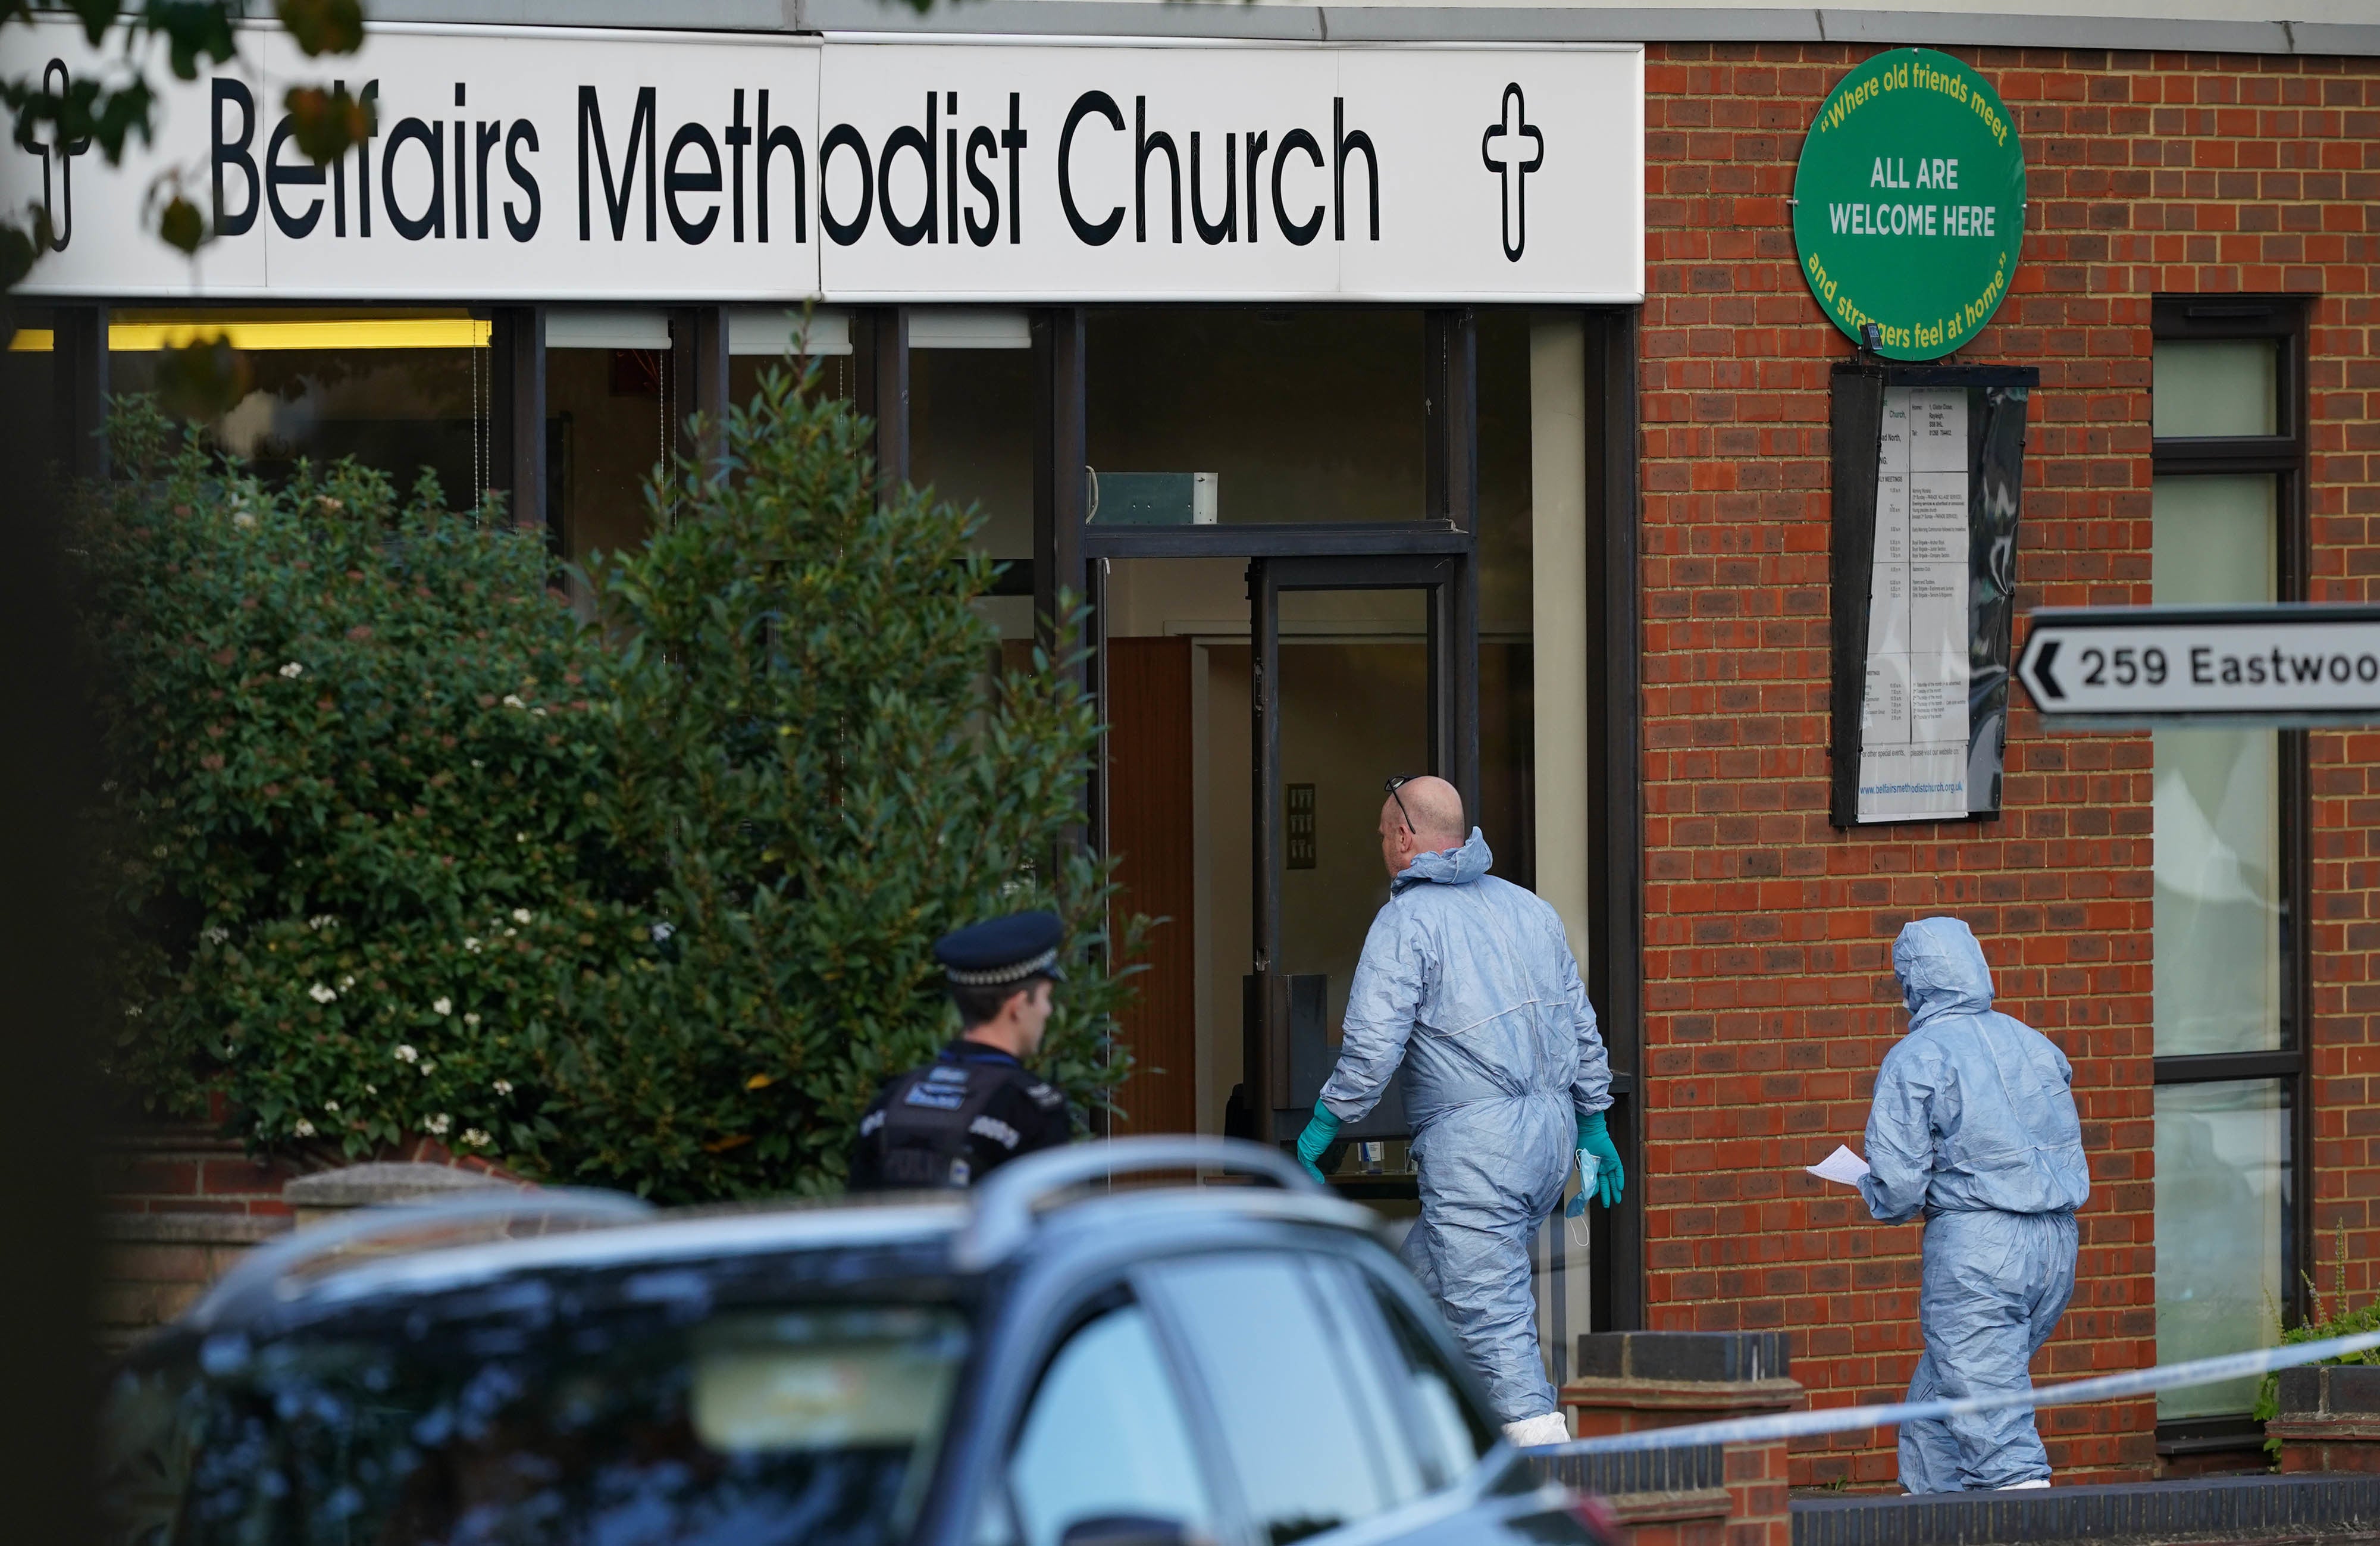 Forensic officers at the scene near the Belfairs Methodist Church after Sir David was killed